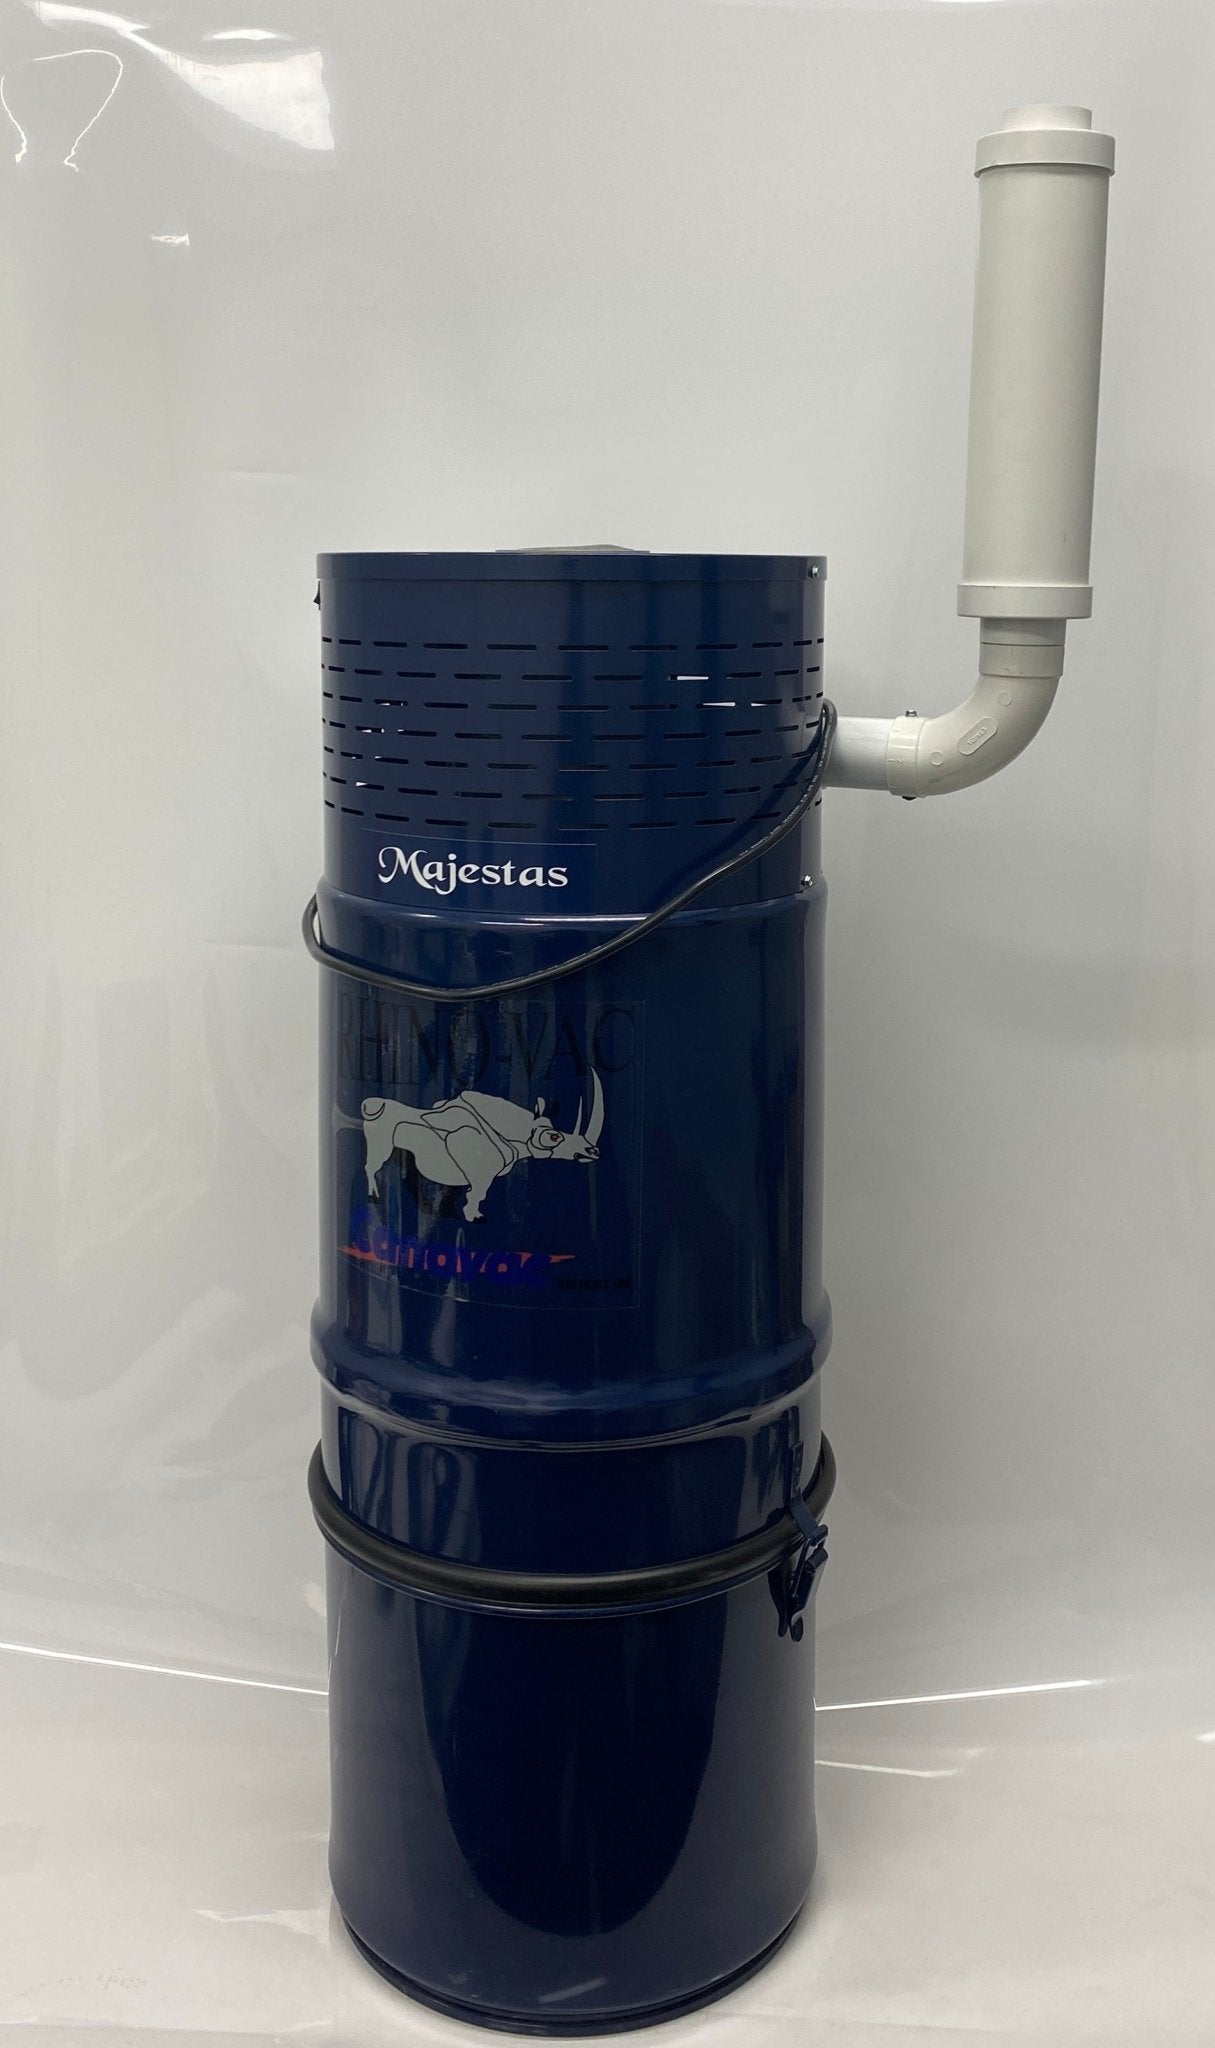 RhinoVac Majestas Central Vacuum System with Full Kit and 6-Month Warranty
Upgrade to the Powerful RhinoVac Majestas Central Vacuum System for Efficient Cleaning